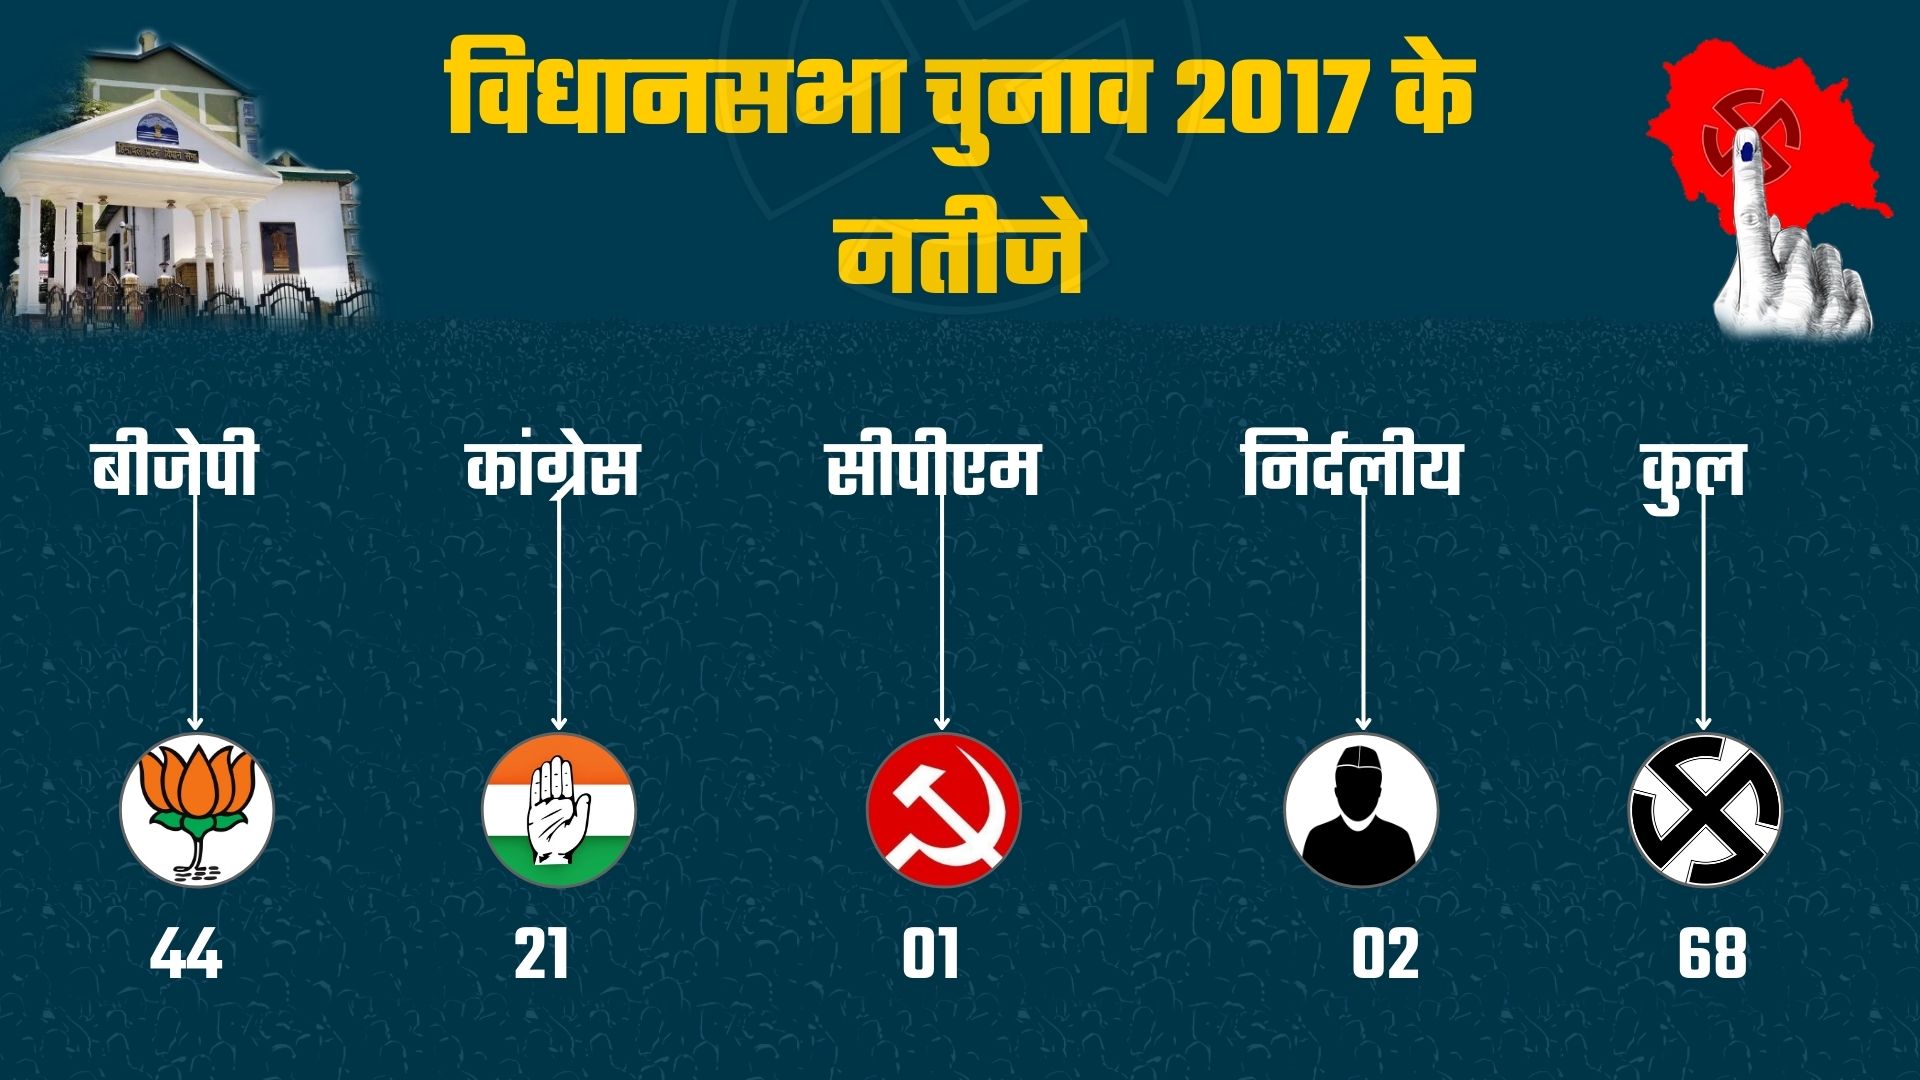 himachal assembly elections 2017 report